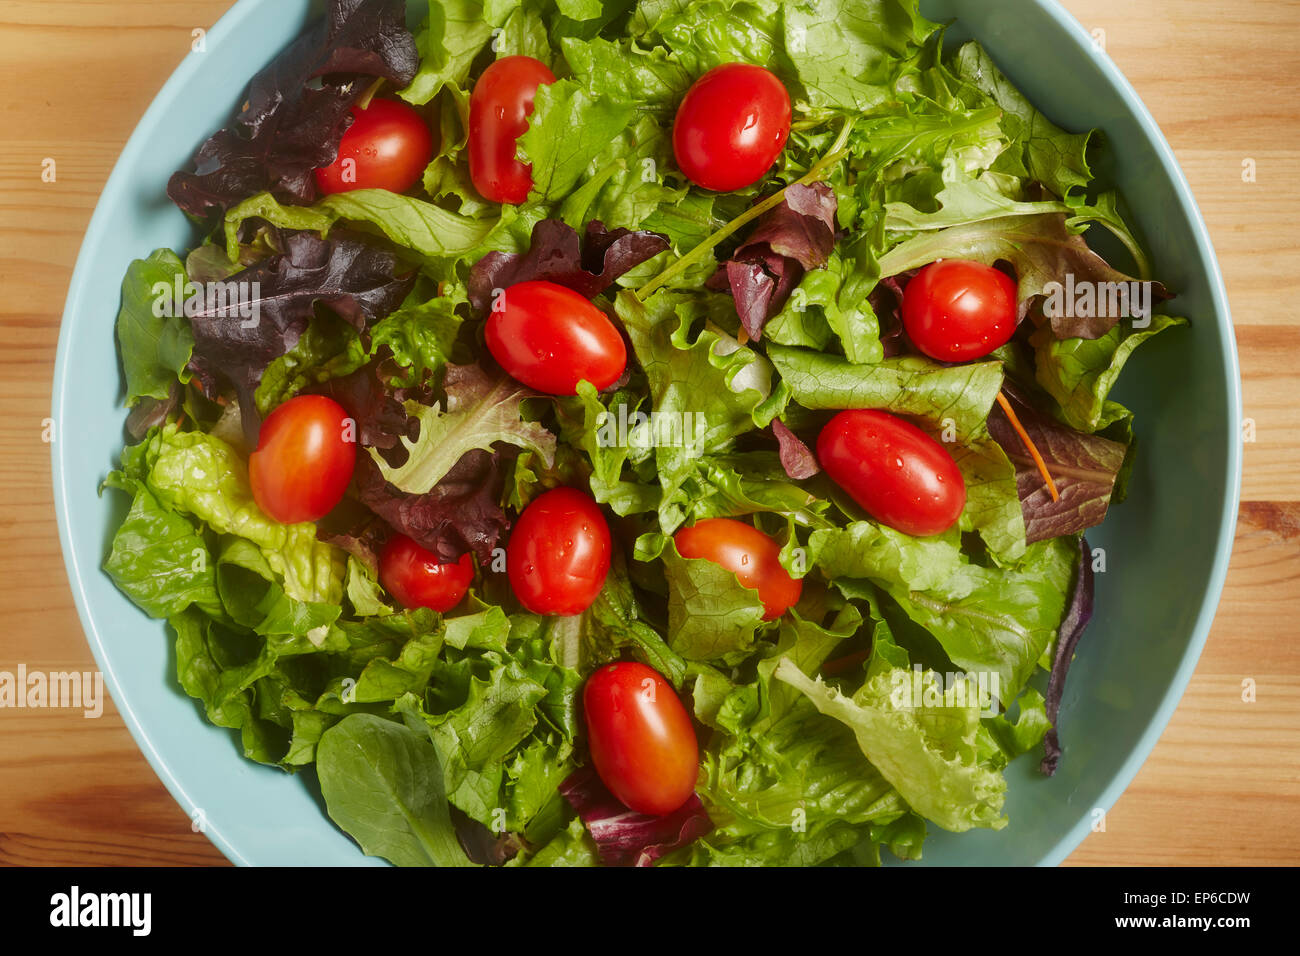 Mixed green salad with cherry tomatoes Stock Photo